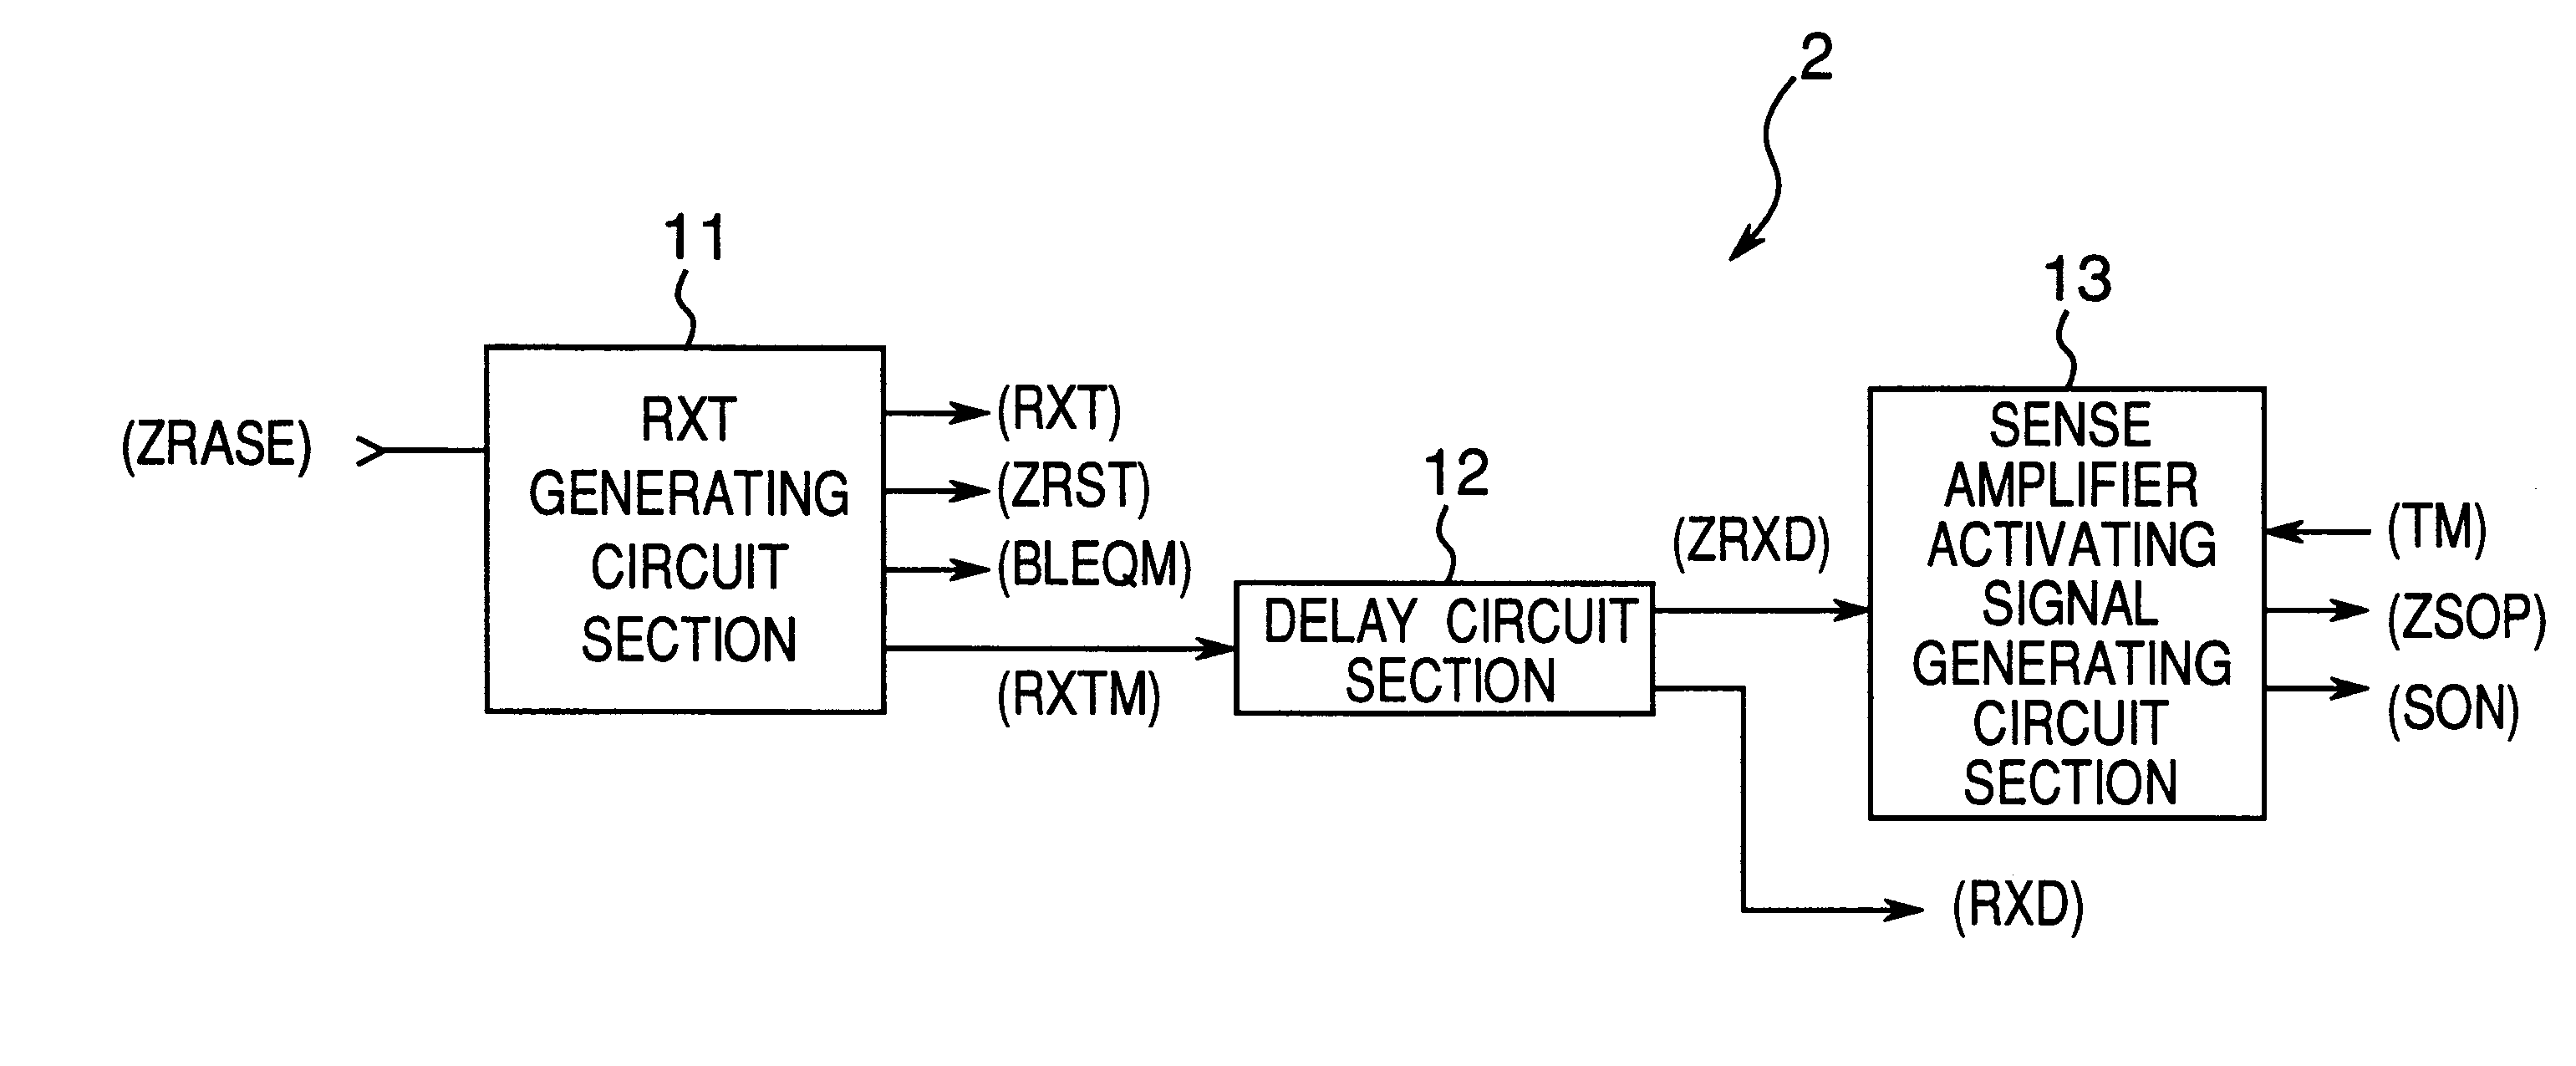 Semiconductor storage device having a delayed sense amplifier activating signal during a test mode